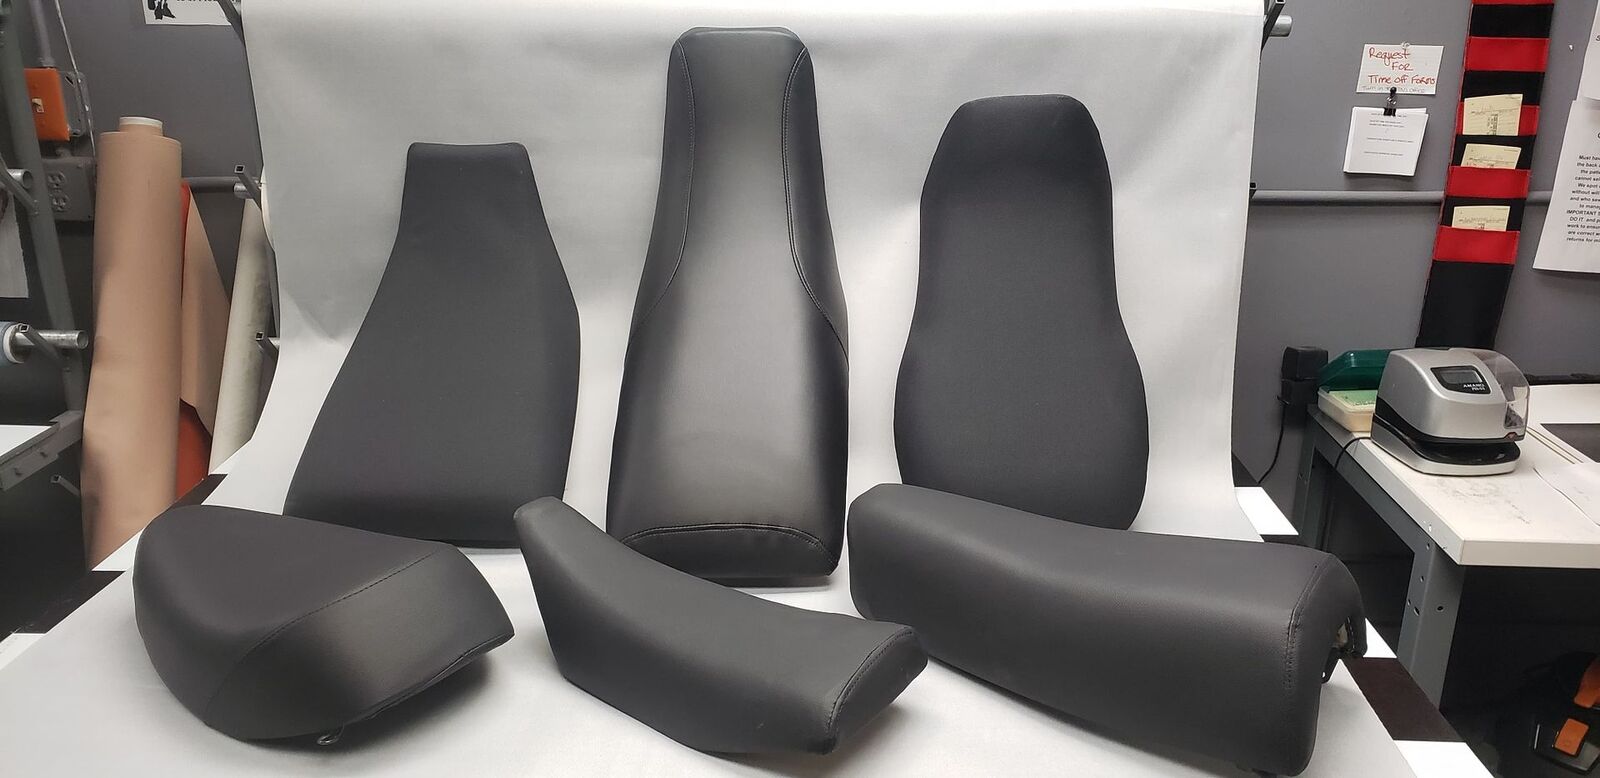 Yamaha DT 1 250 ENDURO Seat Cover For 1969 to 1971 Models